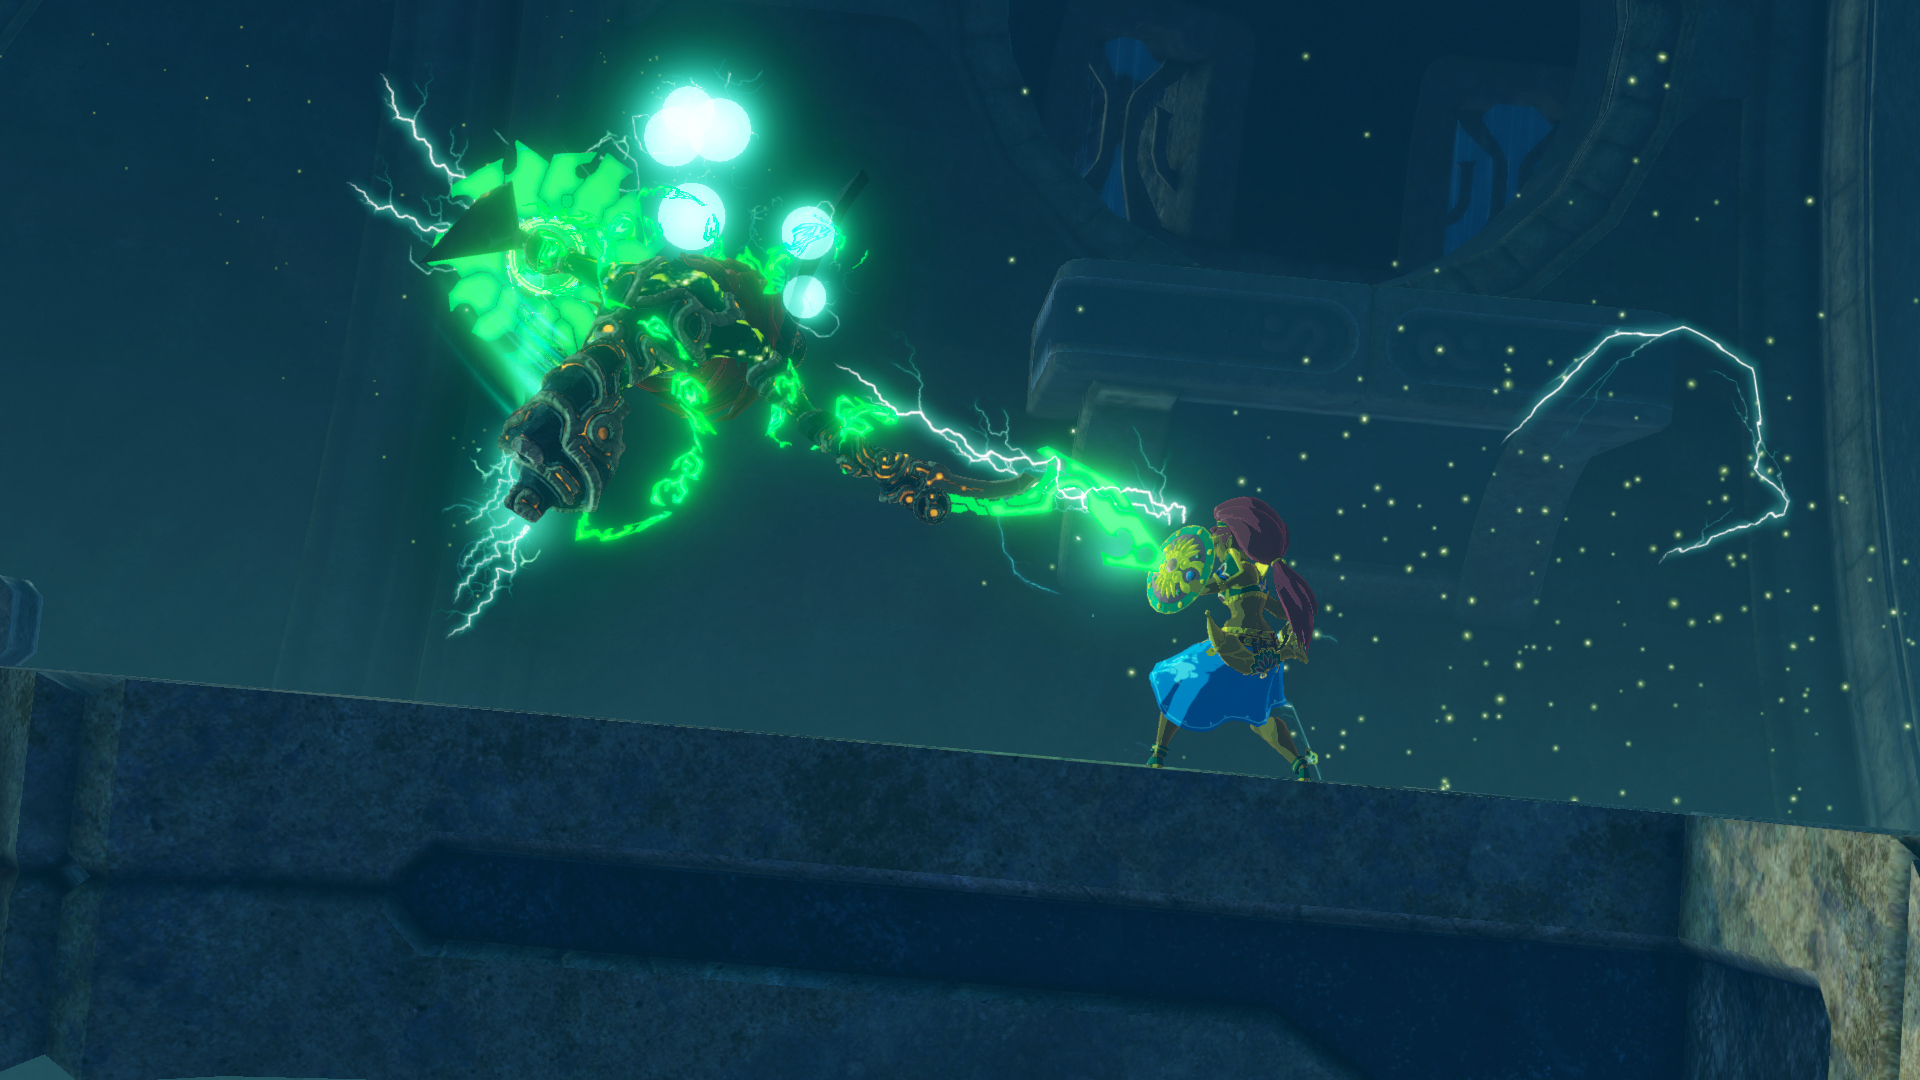 I remember in Breath of the Wild, Urbosa said Thunderblight killed her befo...